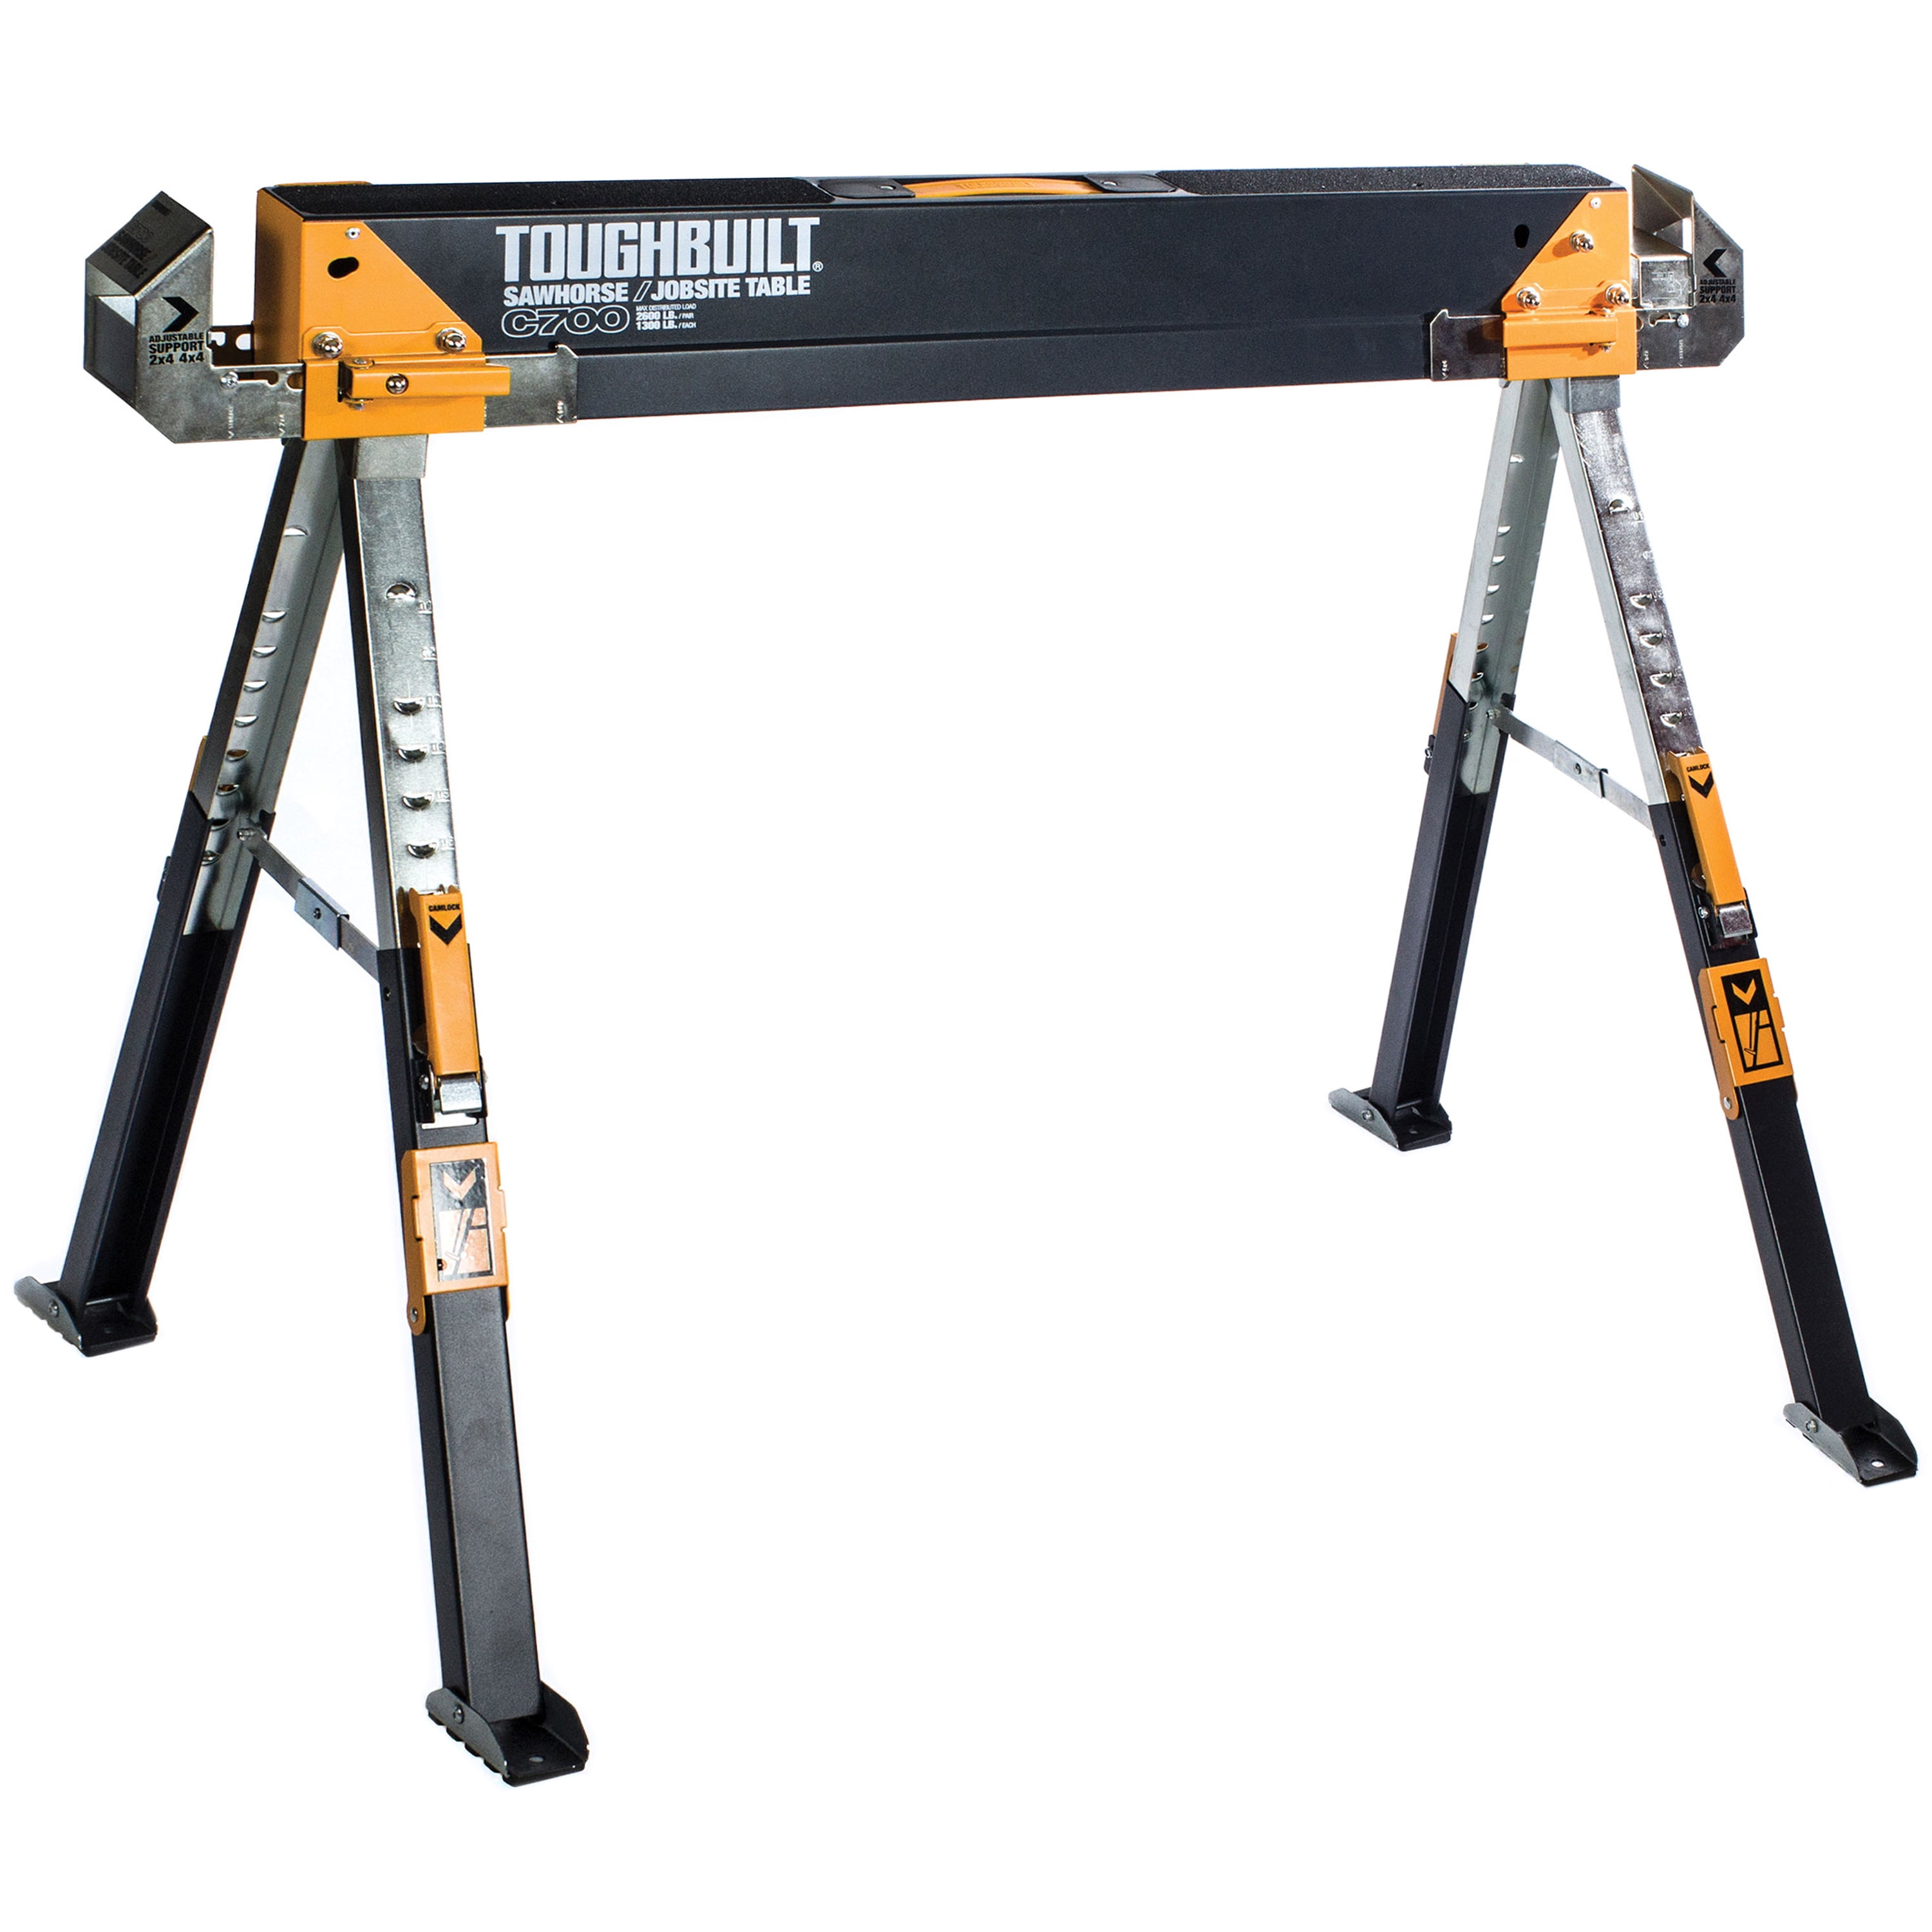 Black/Yellow for sale online TOUGHBUILT TB-C650 Sawhorse and Jobsite Table 